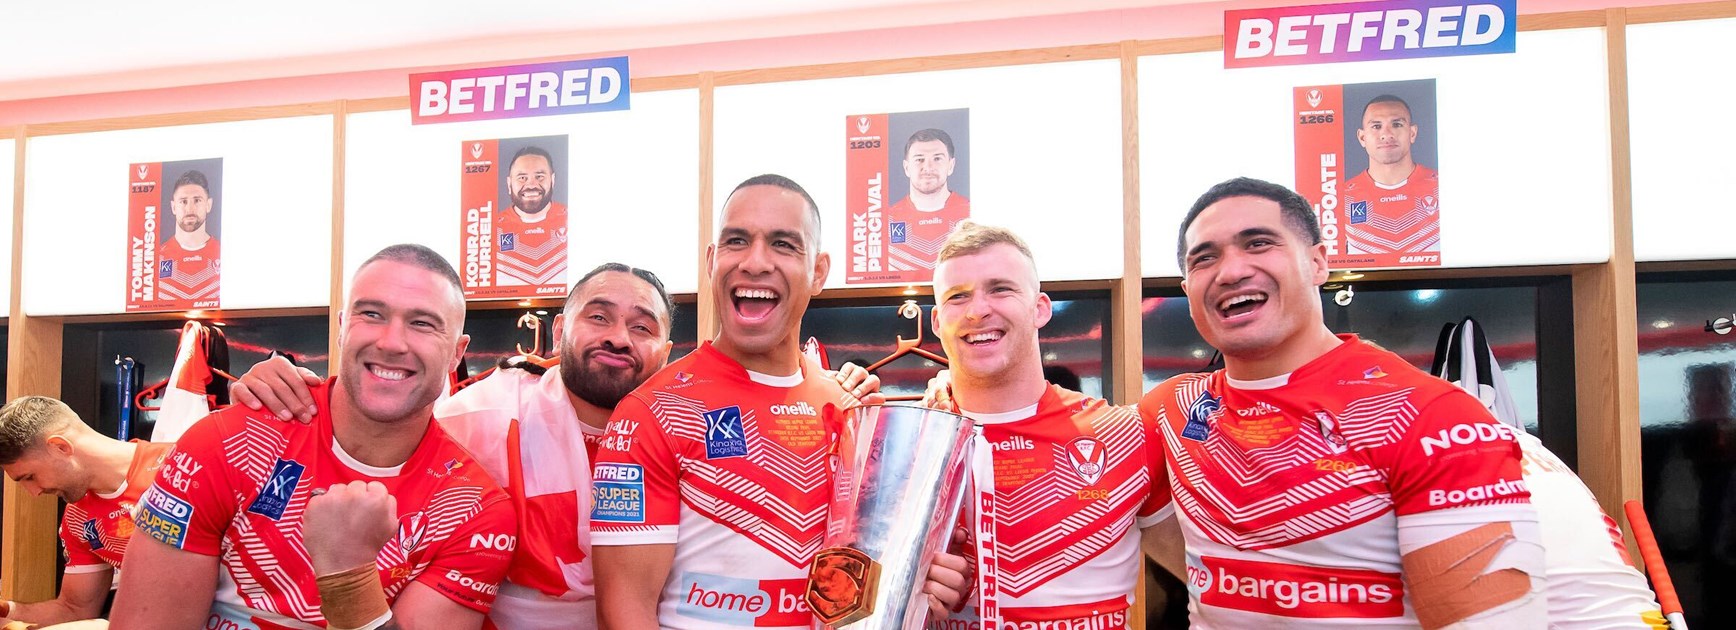 'Pinnacle of club's history': Saints set for Panthers challenge